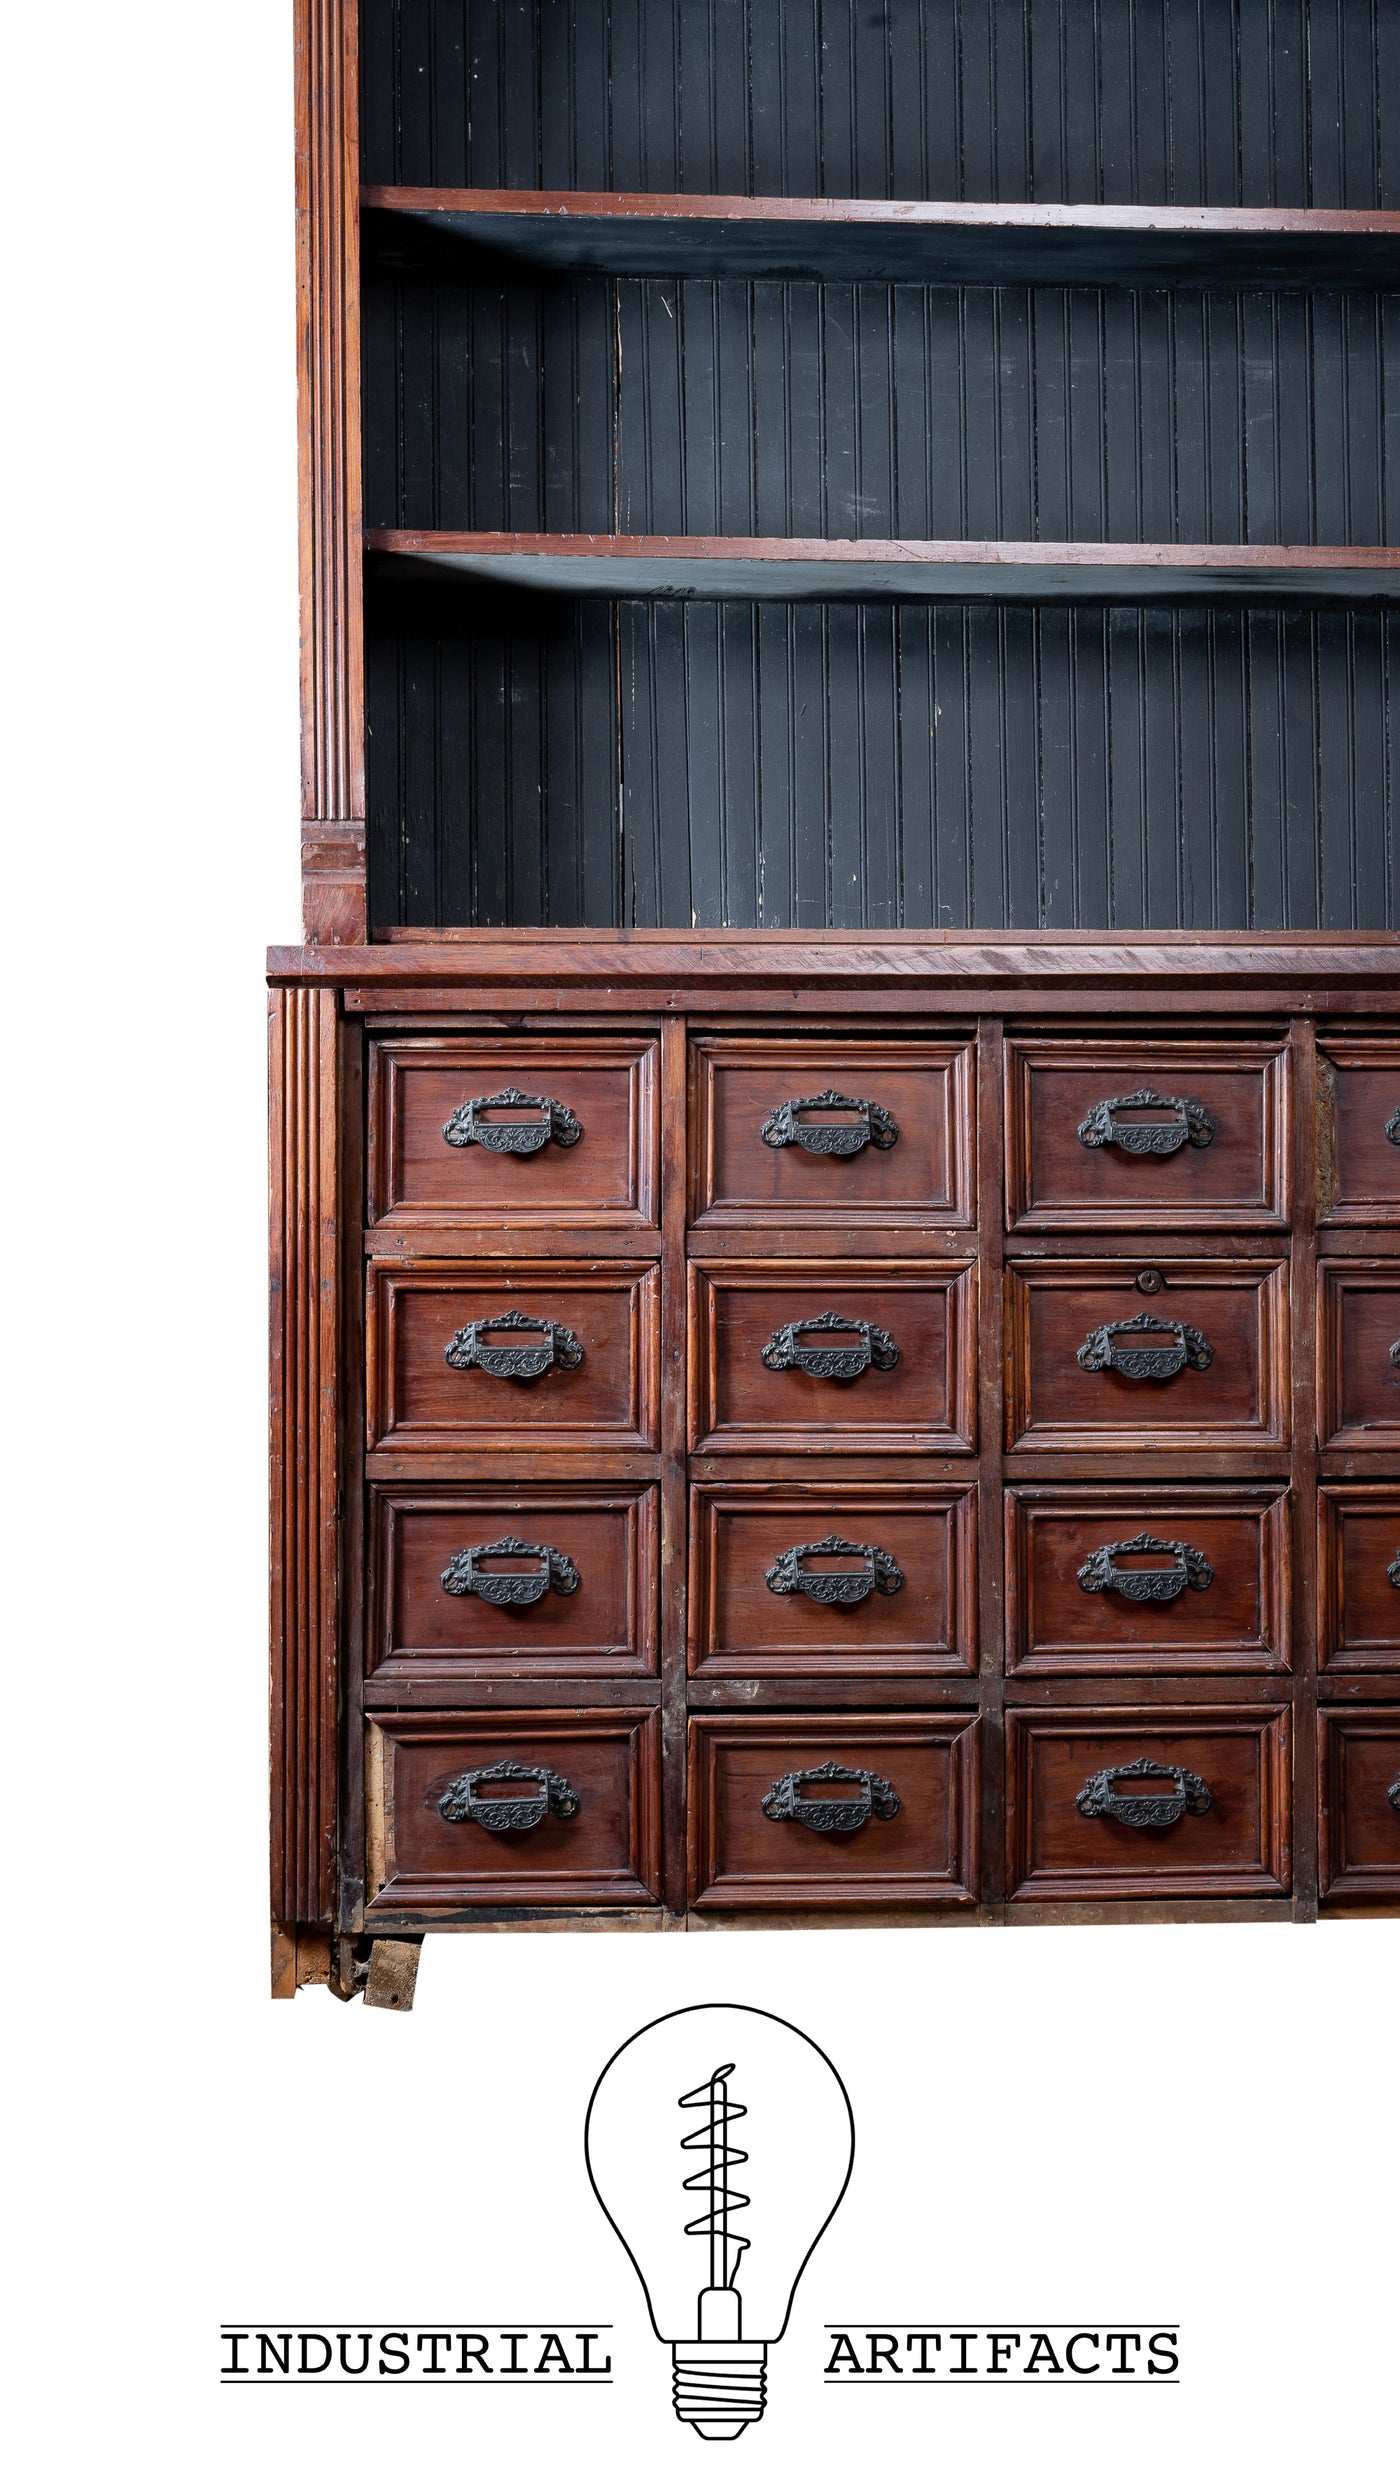 Turn Of The Century Apothecary Cabinet With Back Bar Display